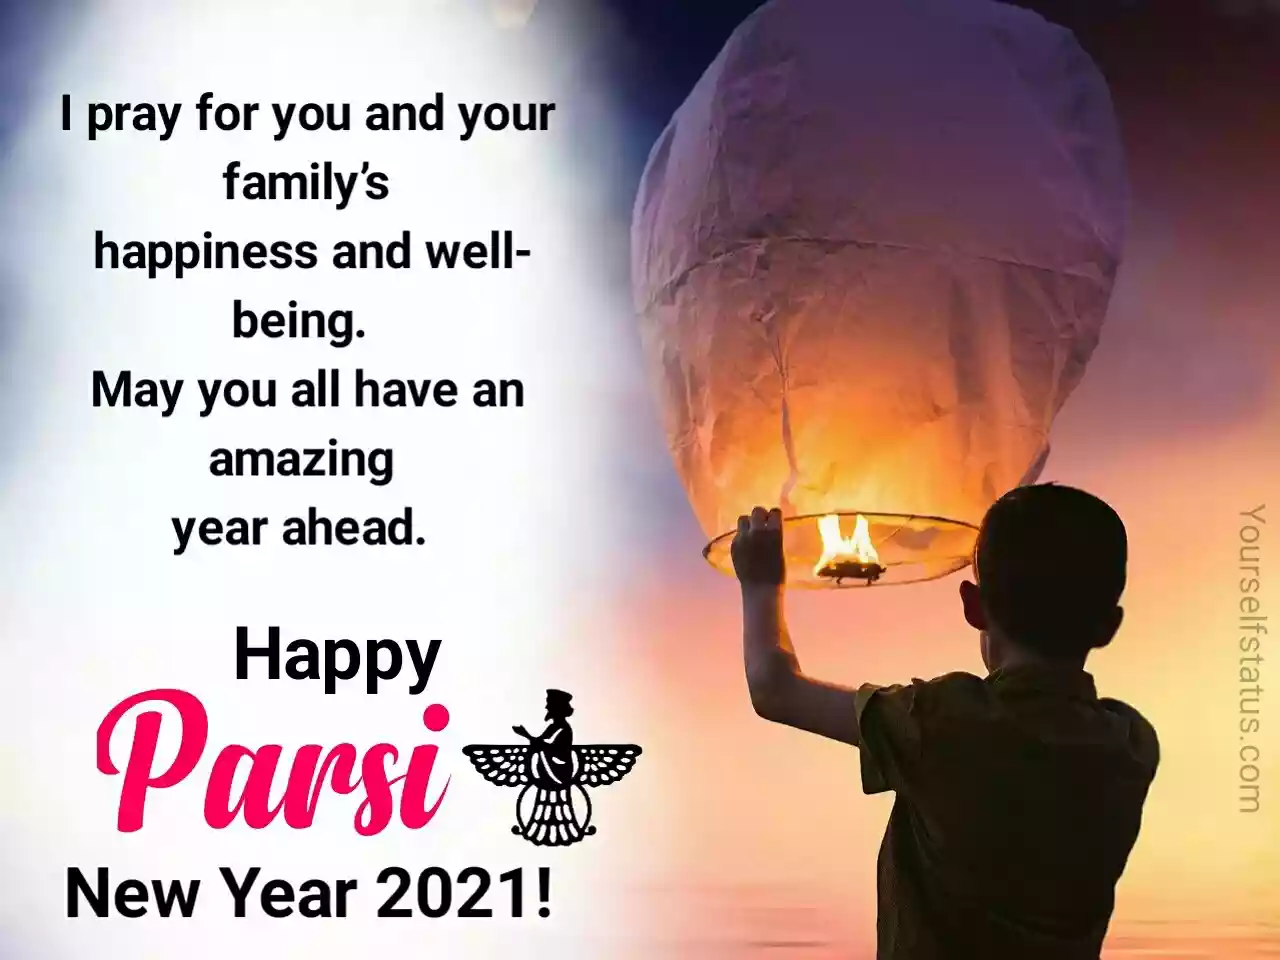 Happy Parsi new year wishes in english 2021